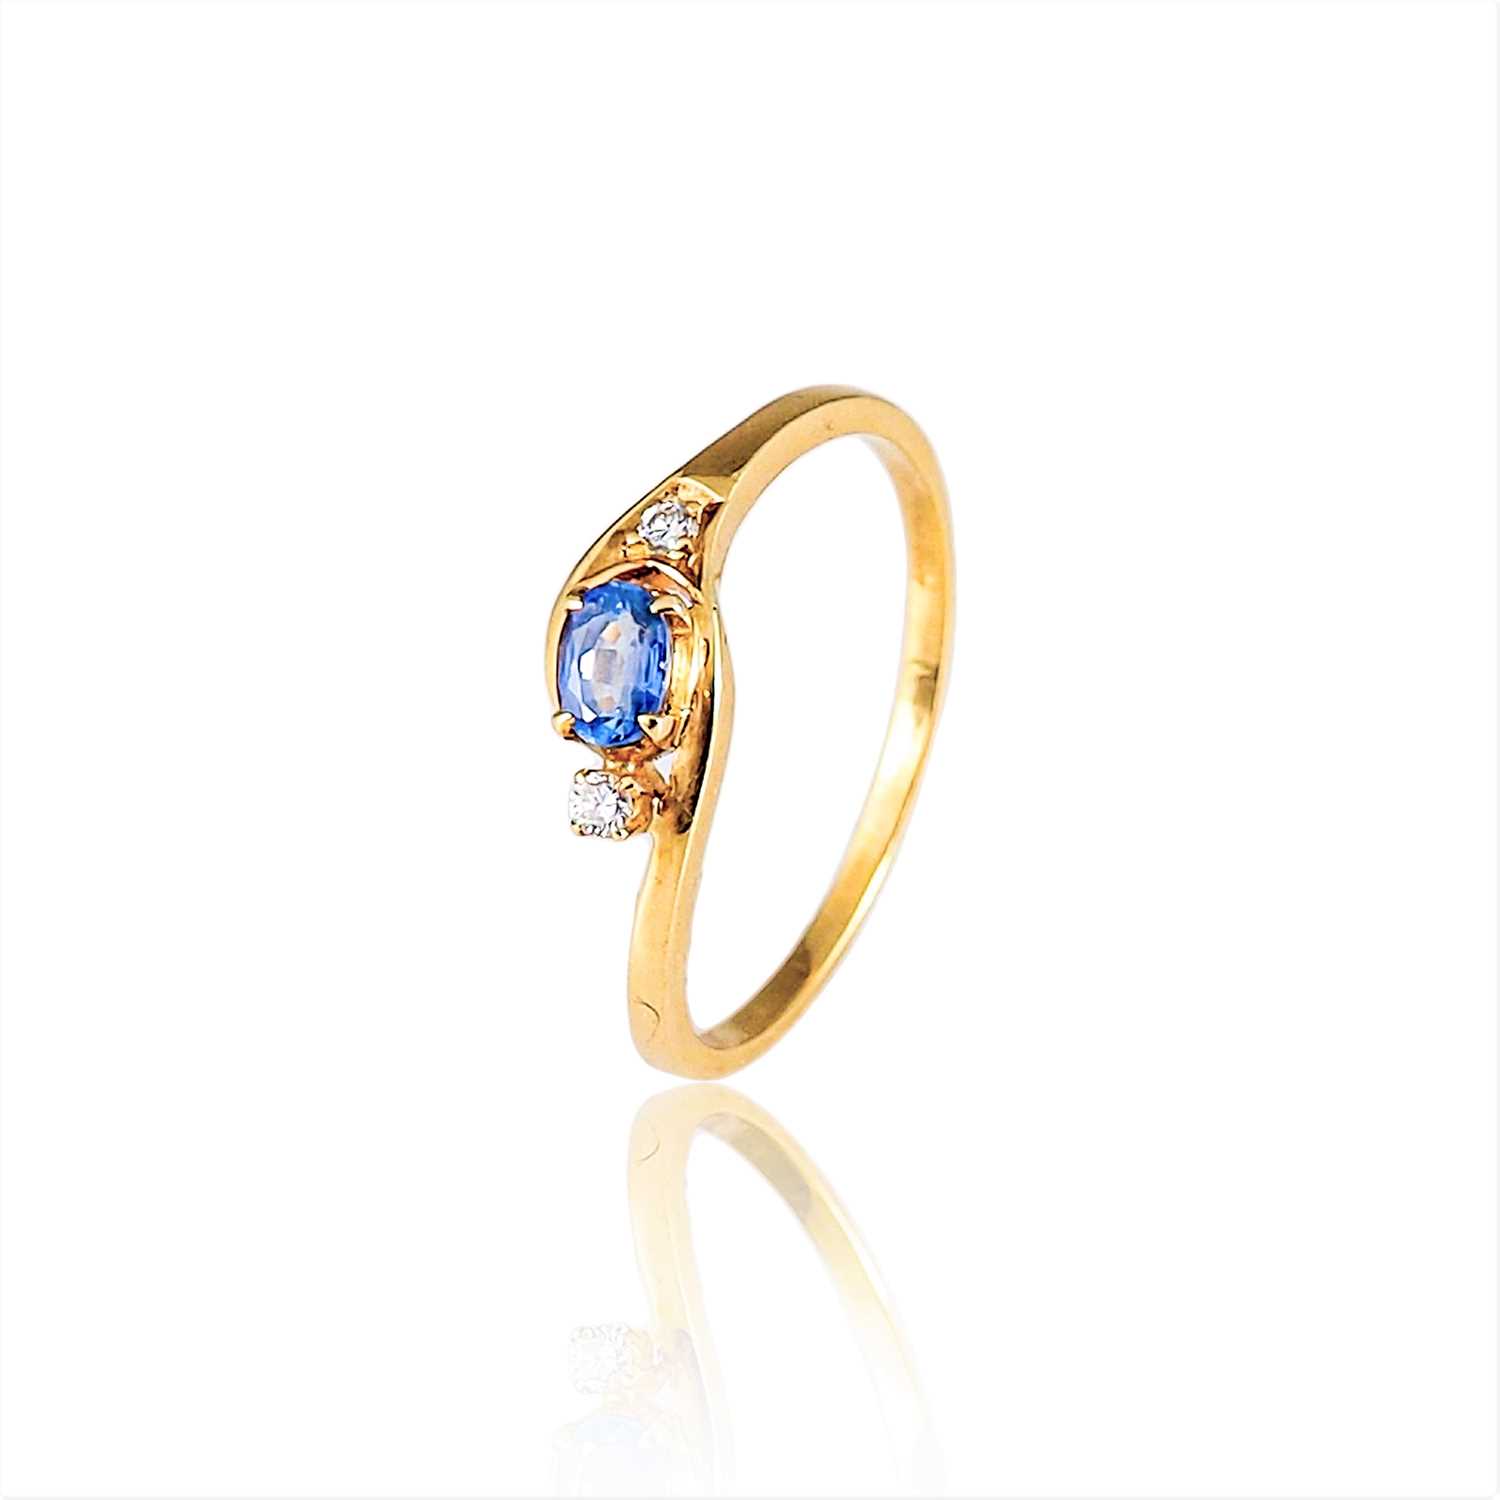 Lot 92 - 18K Gold, Diamond and Sapphire Ring